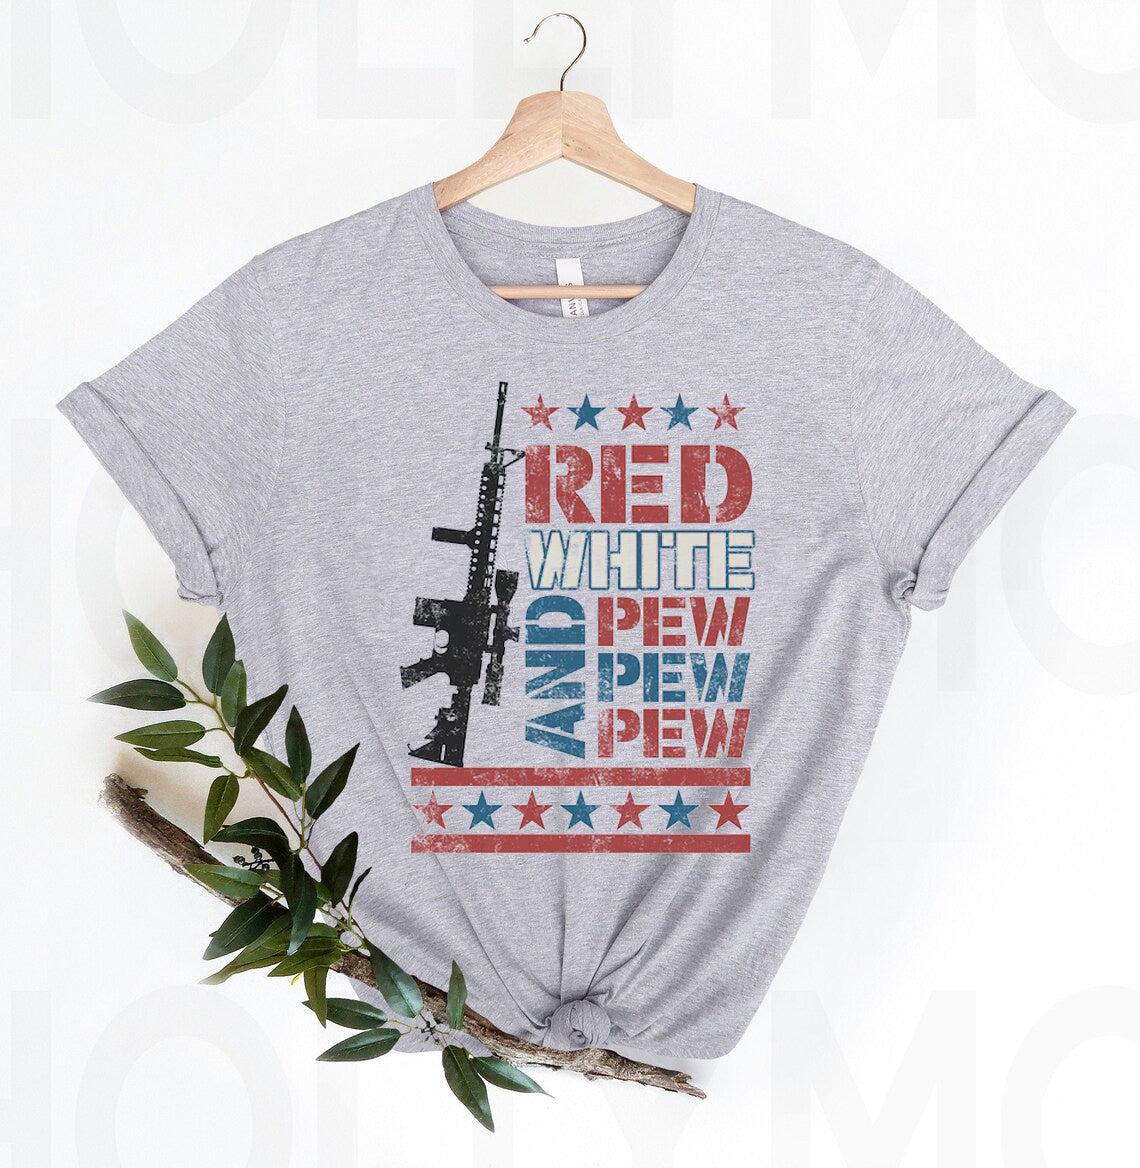 Red White and Pew Pew Pew Graphic Tee